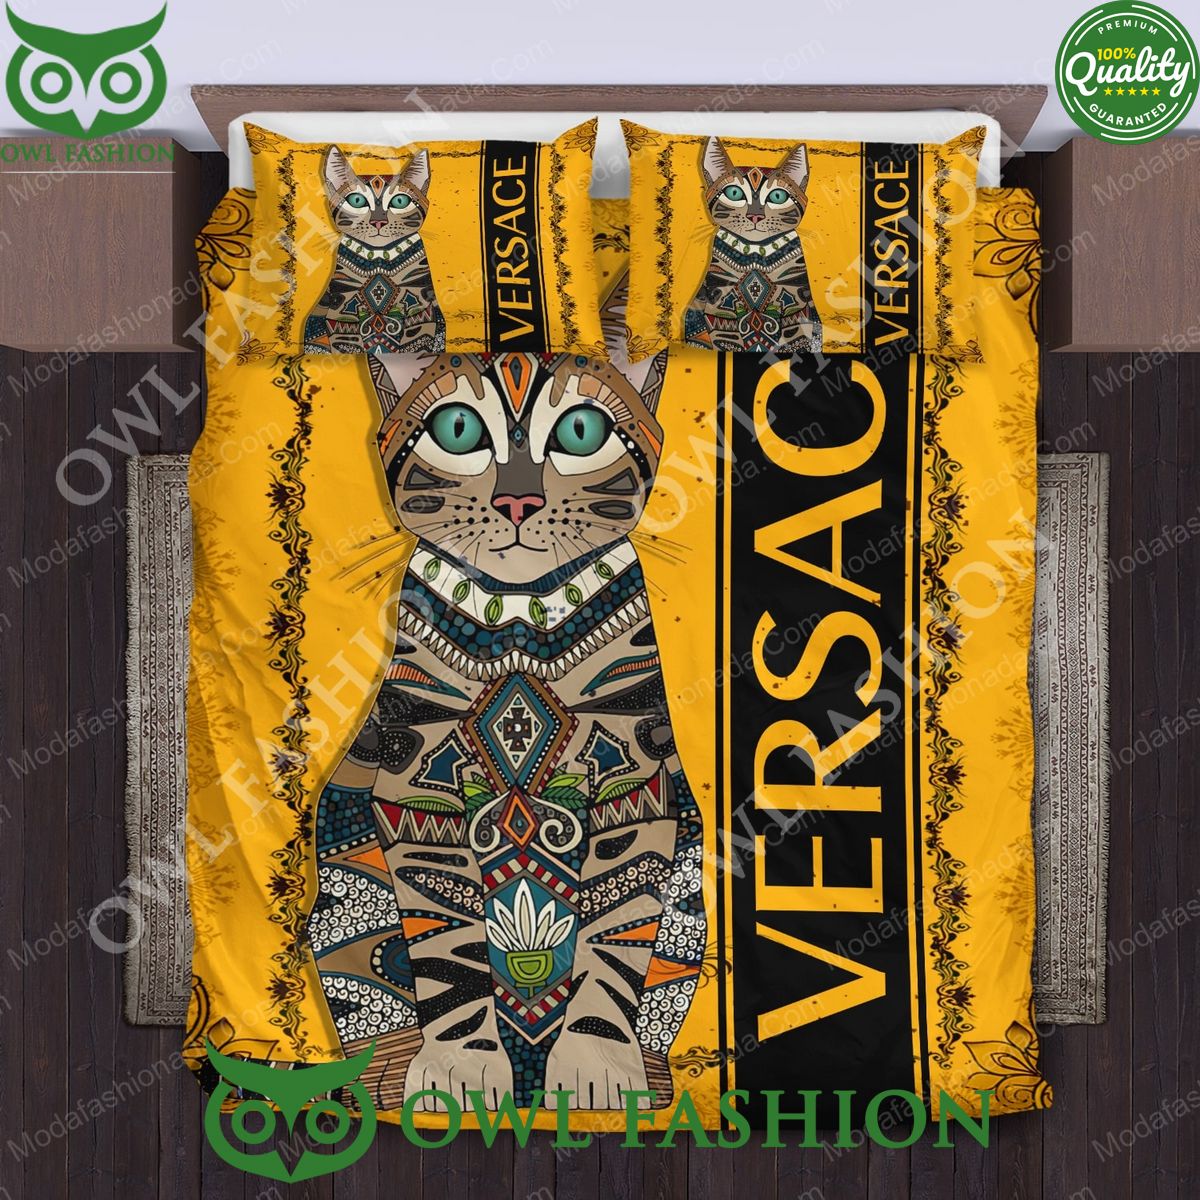 Bengal Versace Limited Luxury Bedding Sets